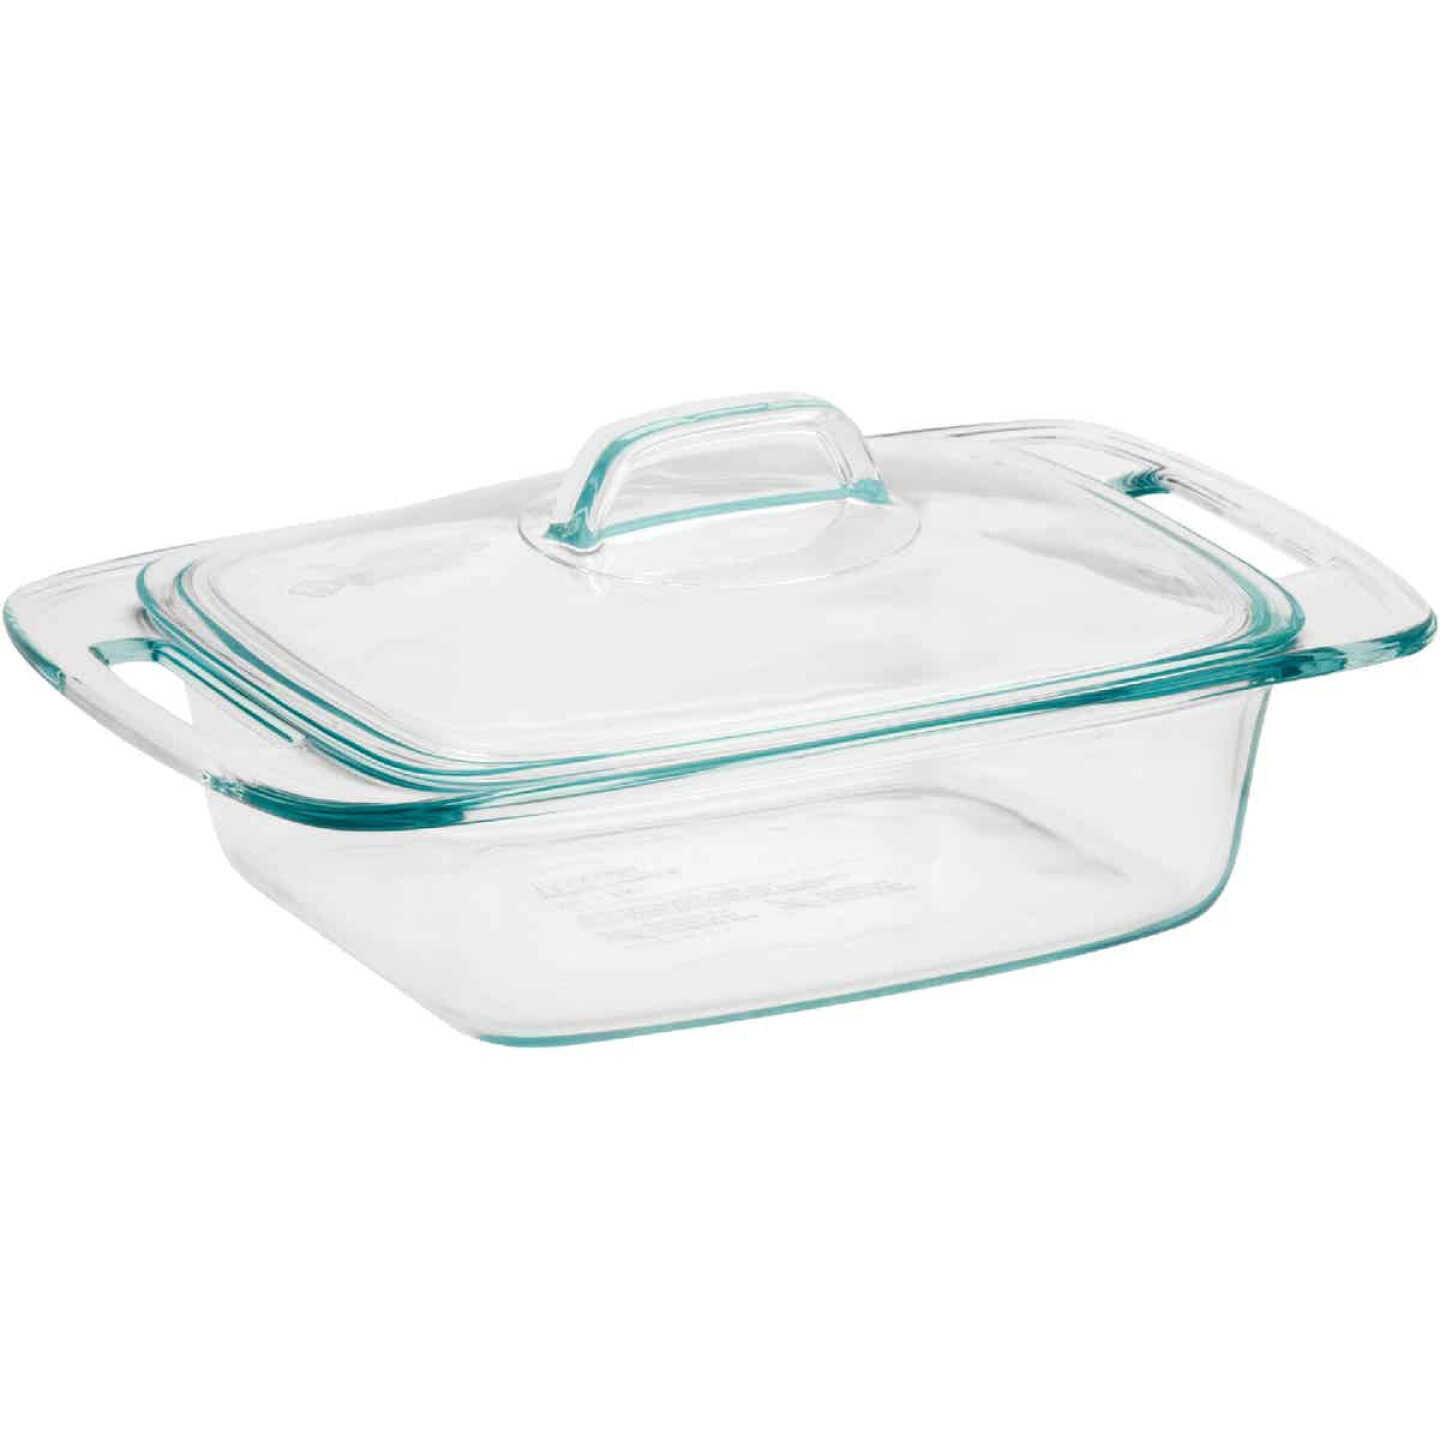 Pyrex Easy Grab 2 Quart Casserole Dish with Glass Cover